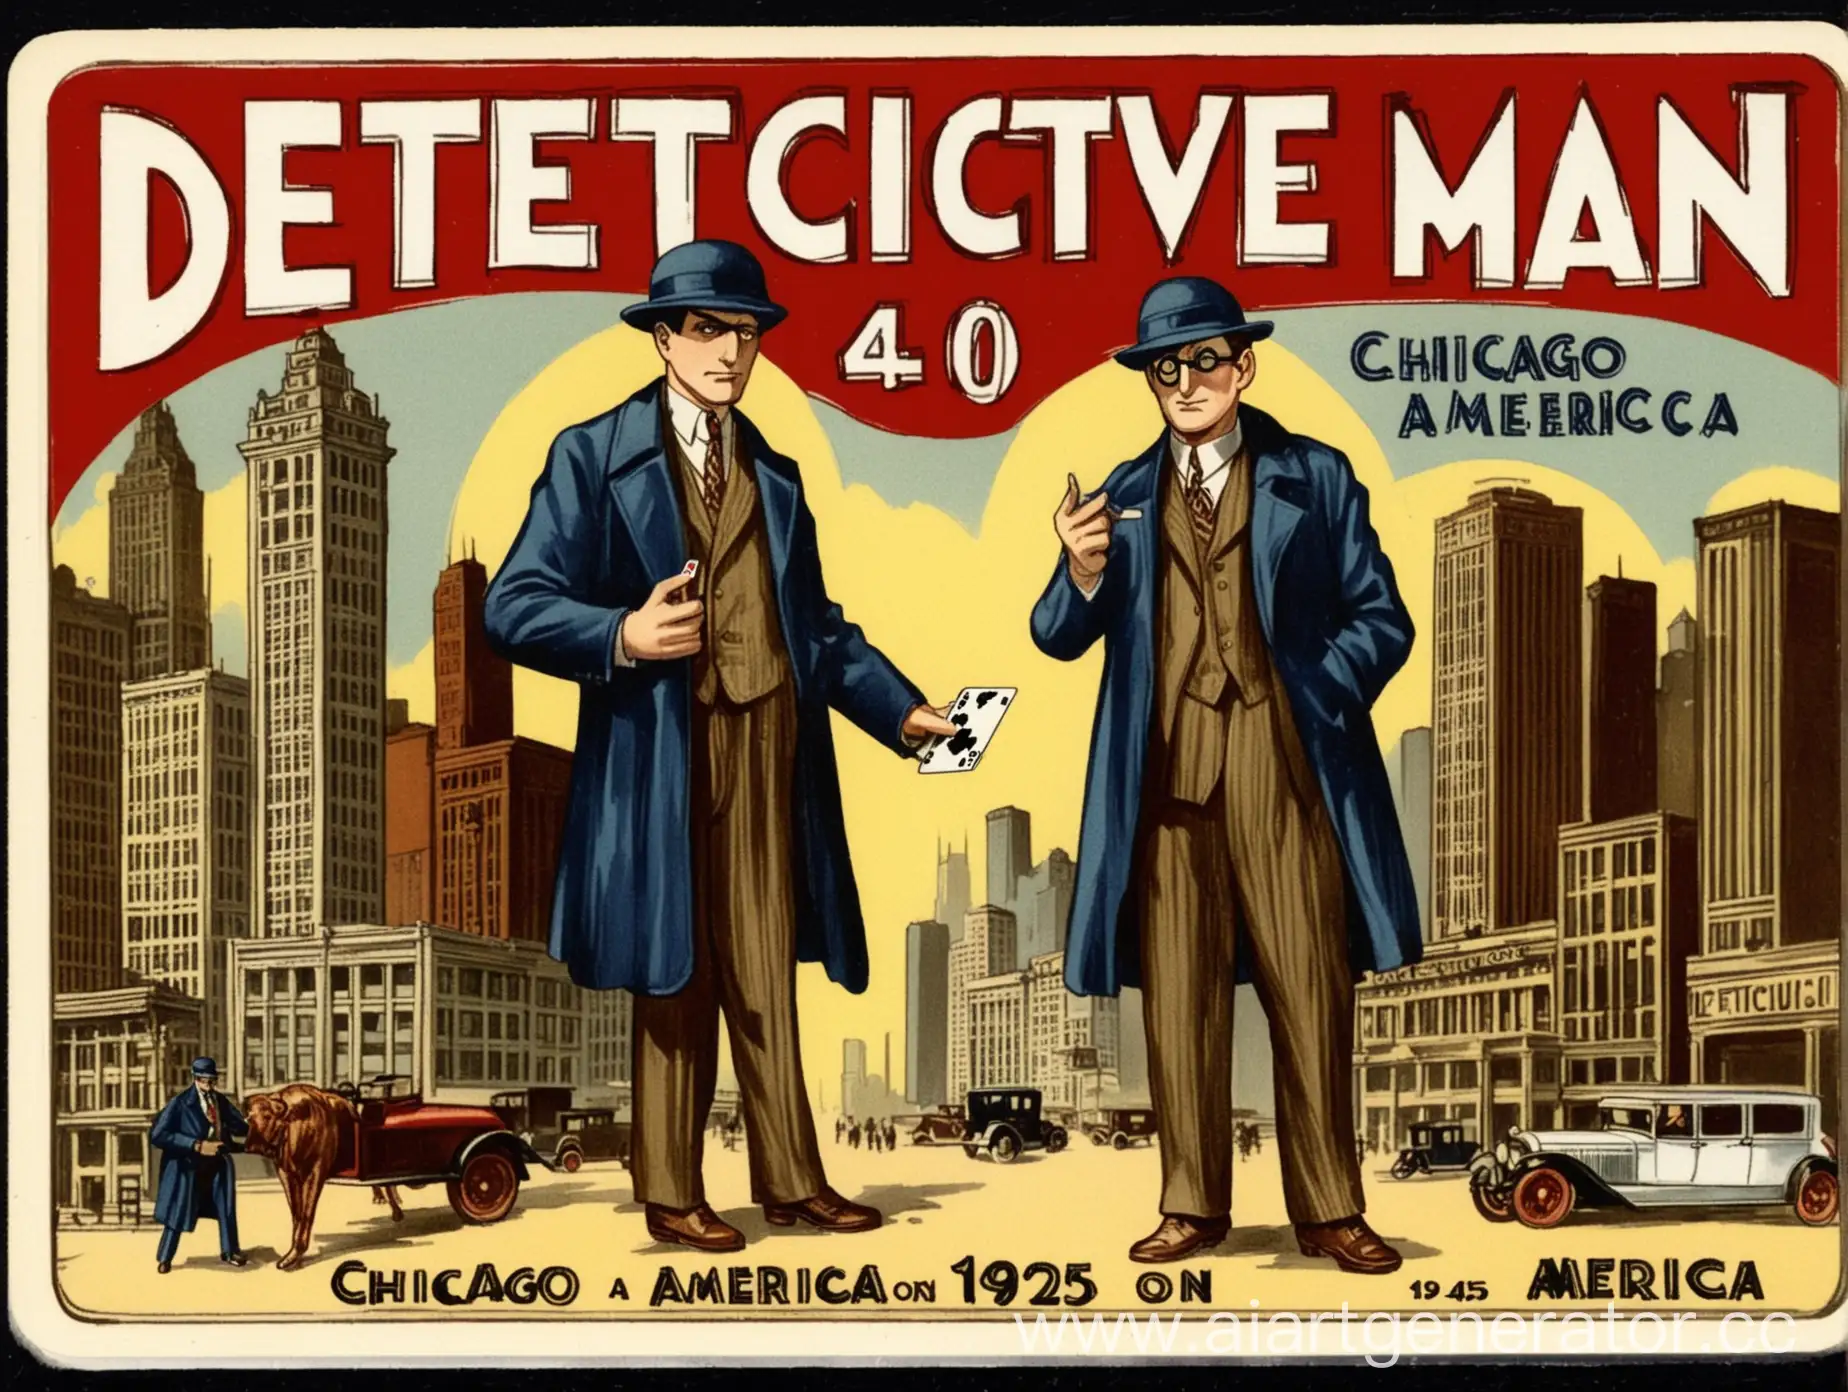 1925-Chicago-Detective-Man-on-a-Vintage-American-Card